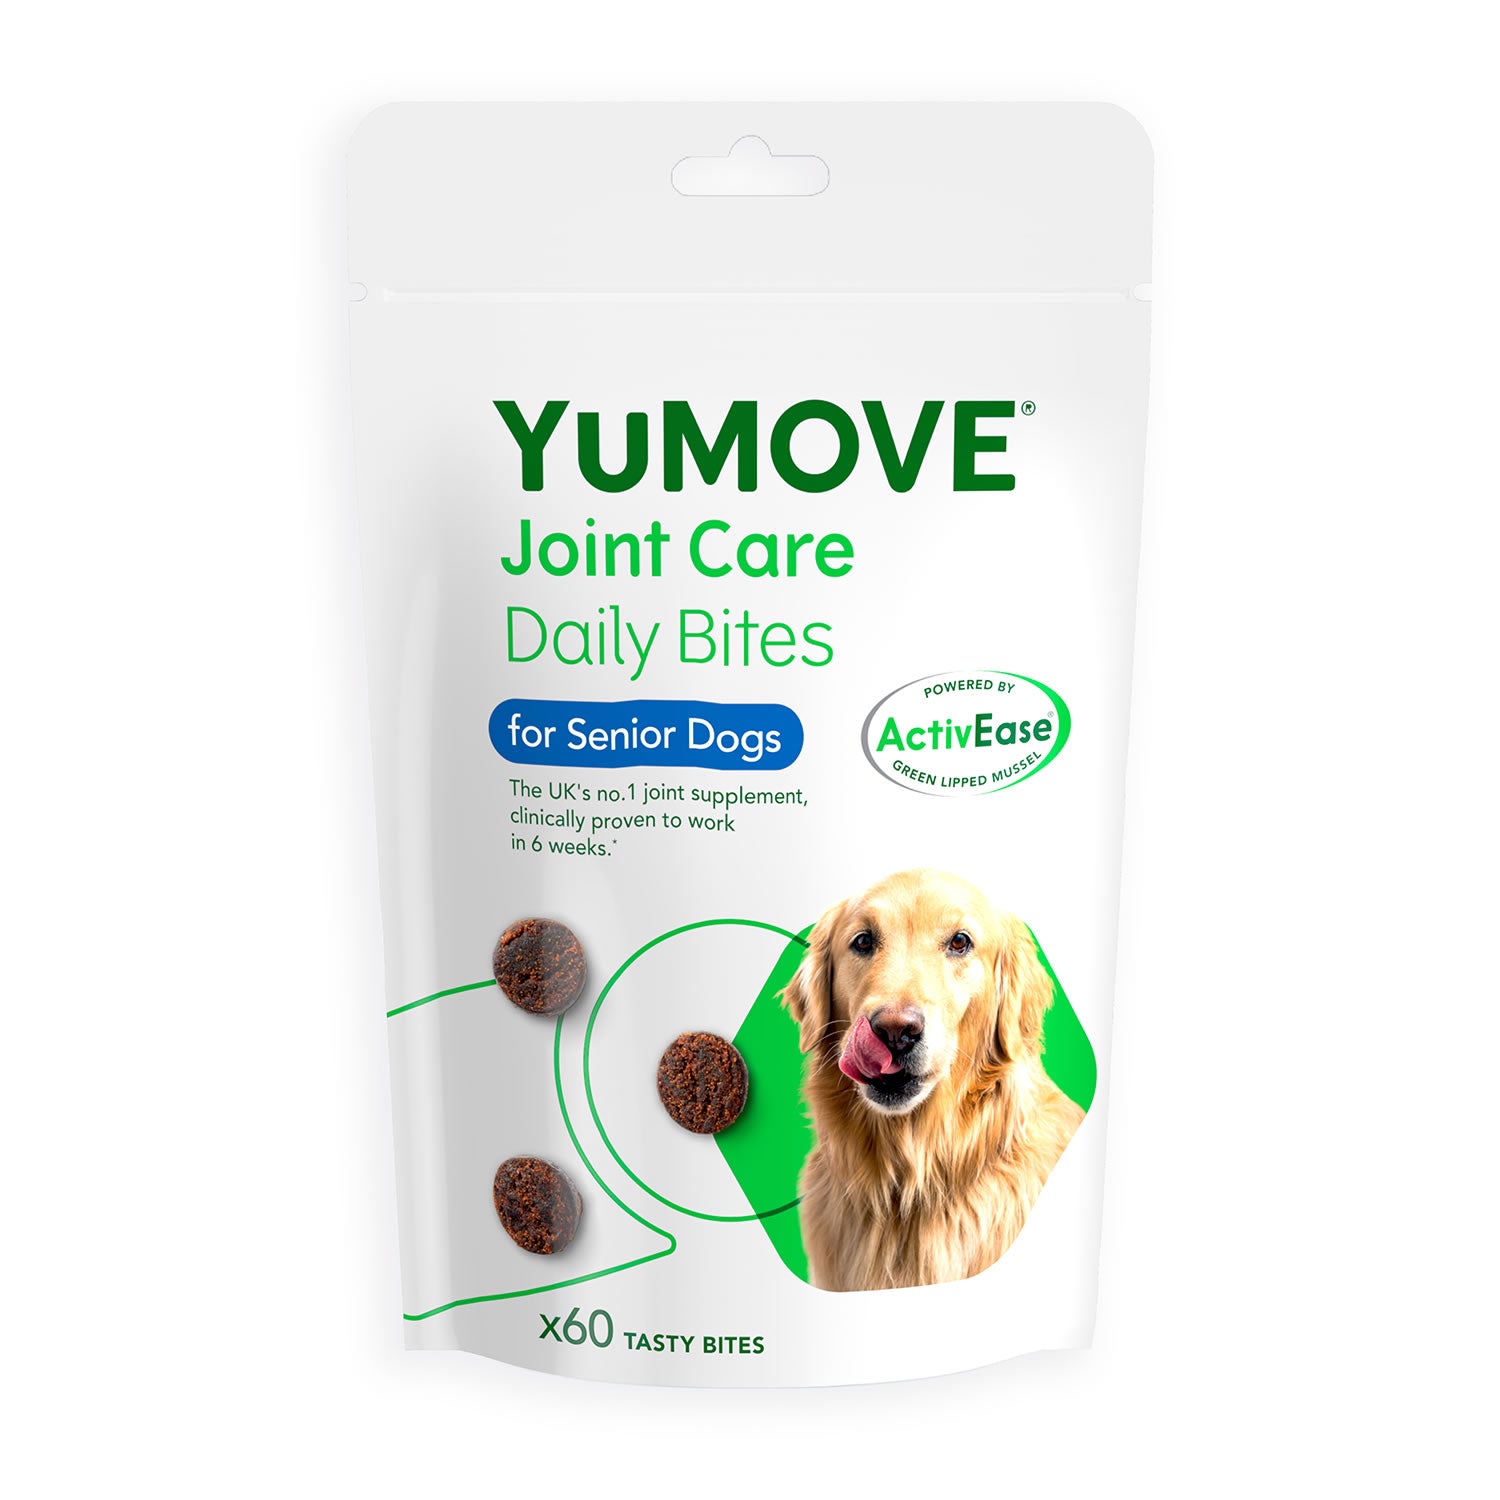 YuMOVE Joint Care Daily Bites For Senior Dogs - 60 Bites